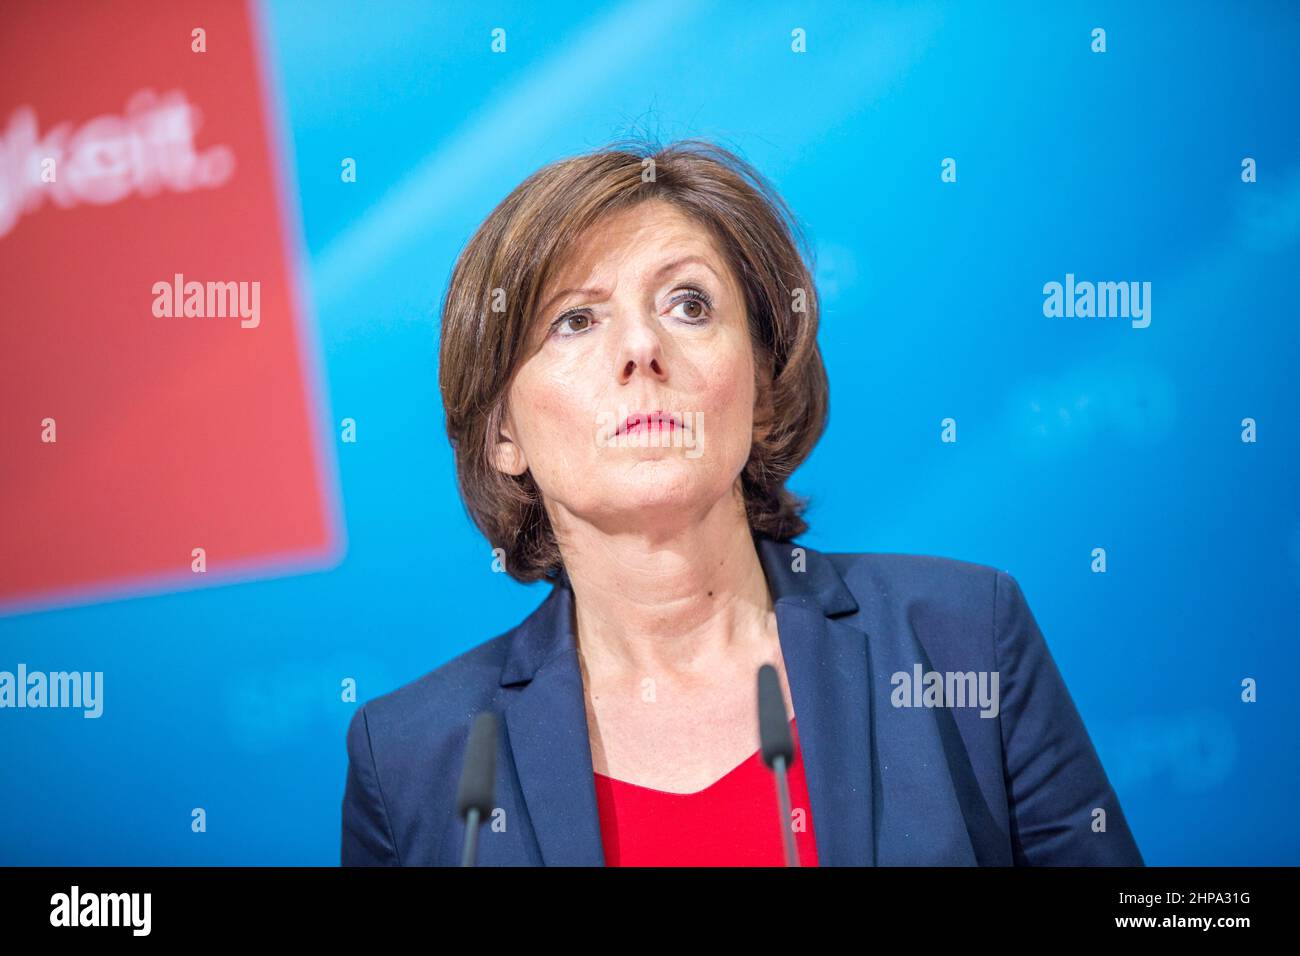 Malu Dreyer the Minister President of Rhineland-Palatinate is speaking during a joint press conference with SPD Chancellor candidate Martin Schulz at the Willy Brandt Haus in Berlin on July 3, 2017. (Photo by Omer Messinger) Stock Photo